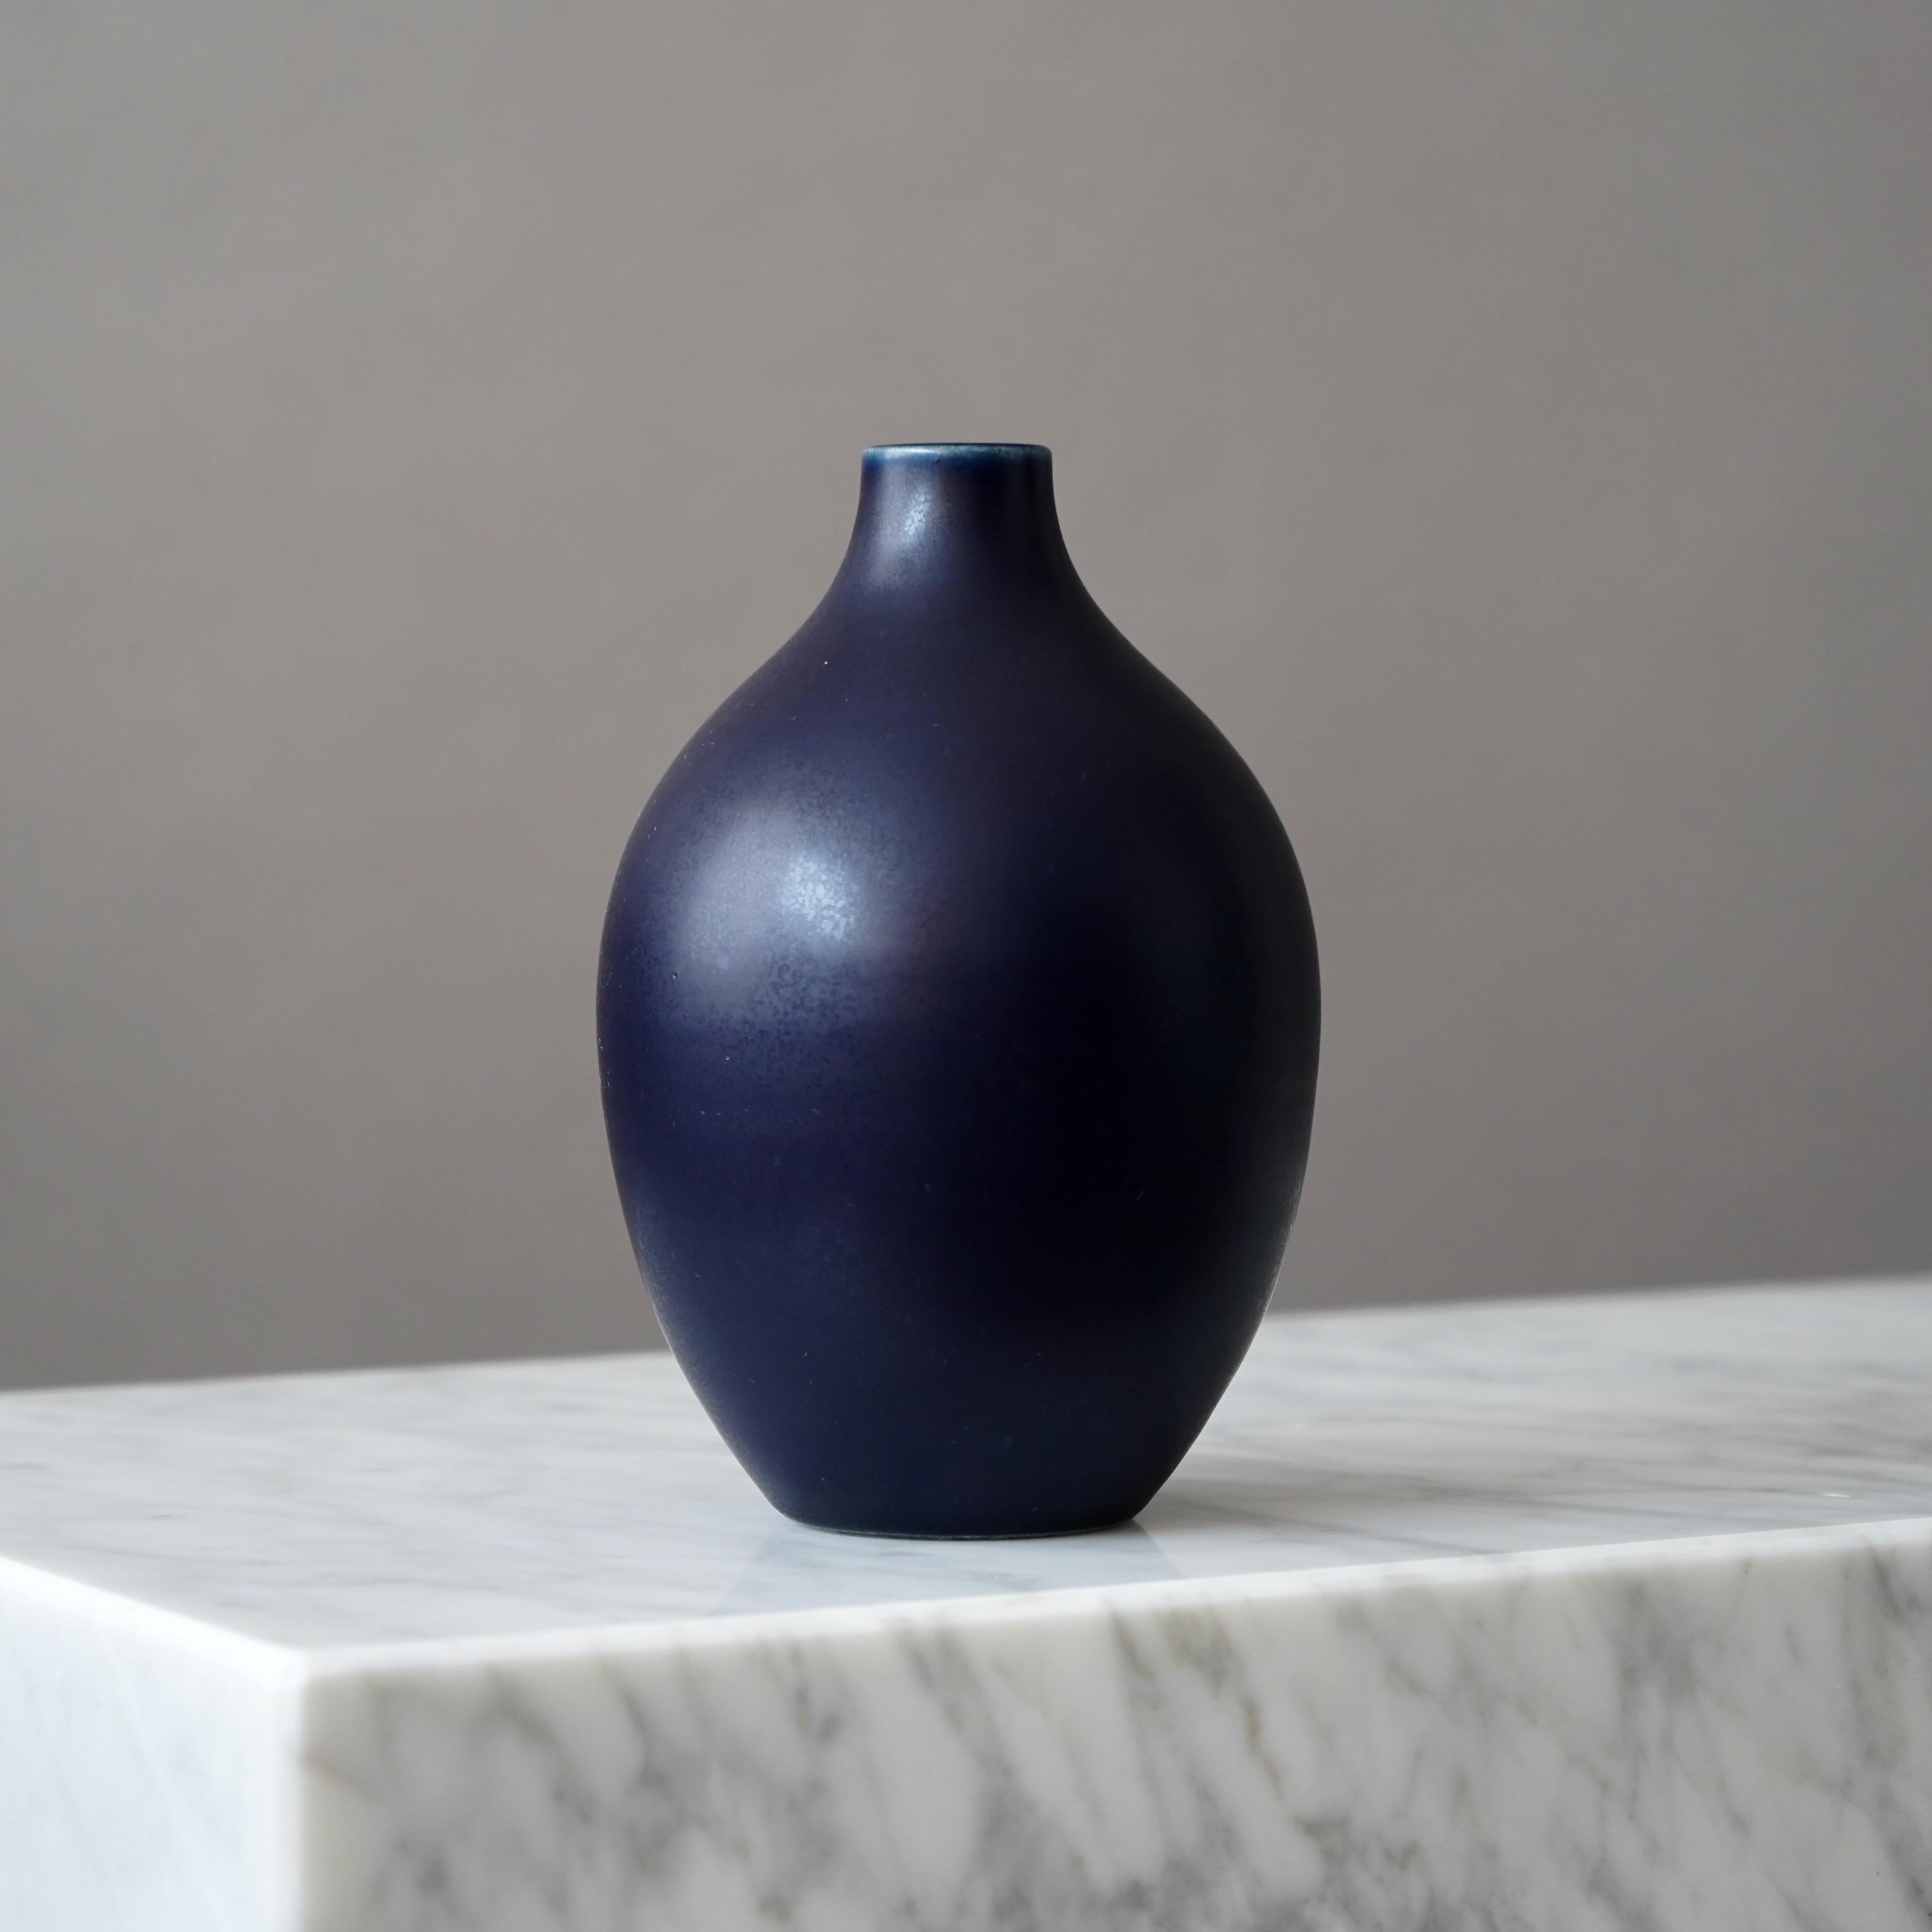 Beautiful stoneware vase made by master ceramists Erich and Ingrid Triller.
This piece was created at their workshop in Tobo, Sweden, 1950’s.

Great condition, with a small white dot in the glaze (pictured). 
Signed on the base with their customary